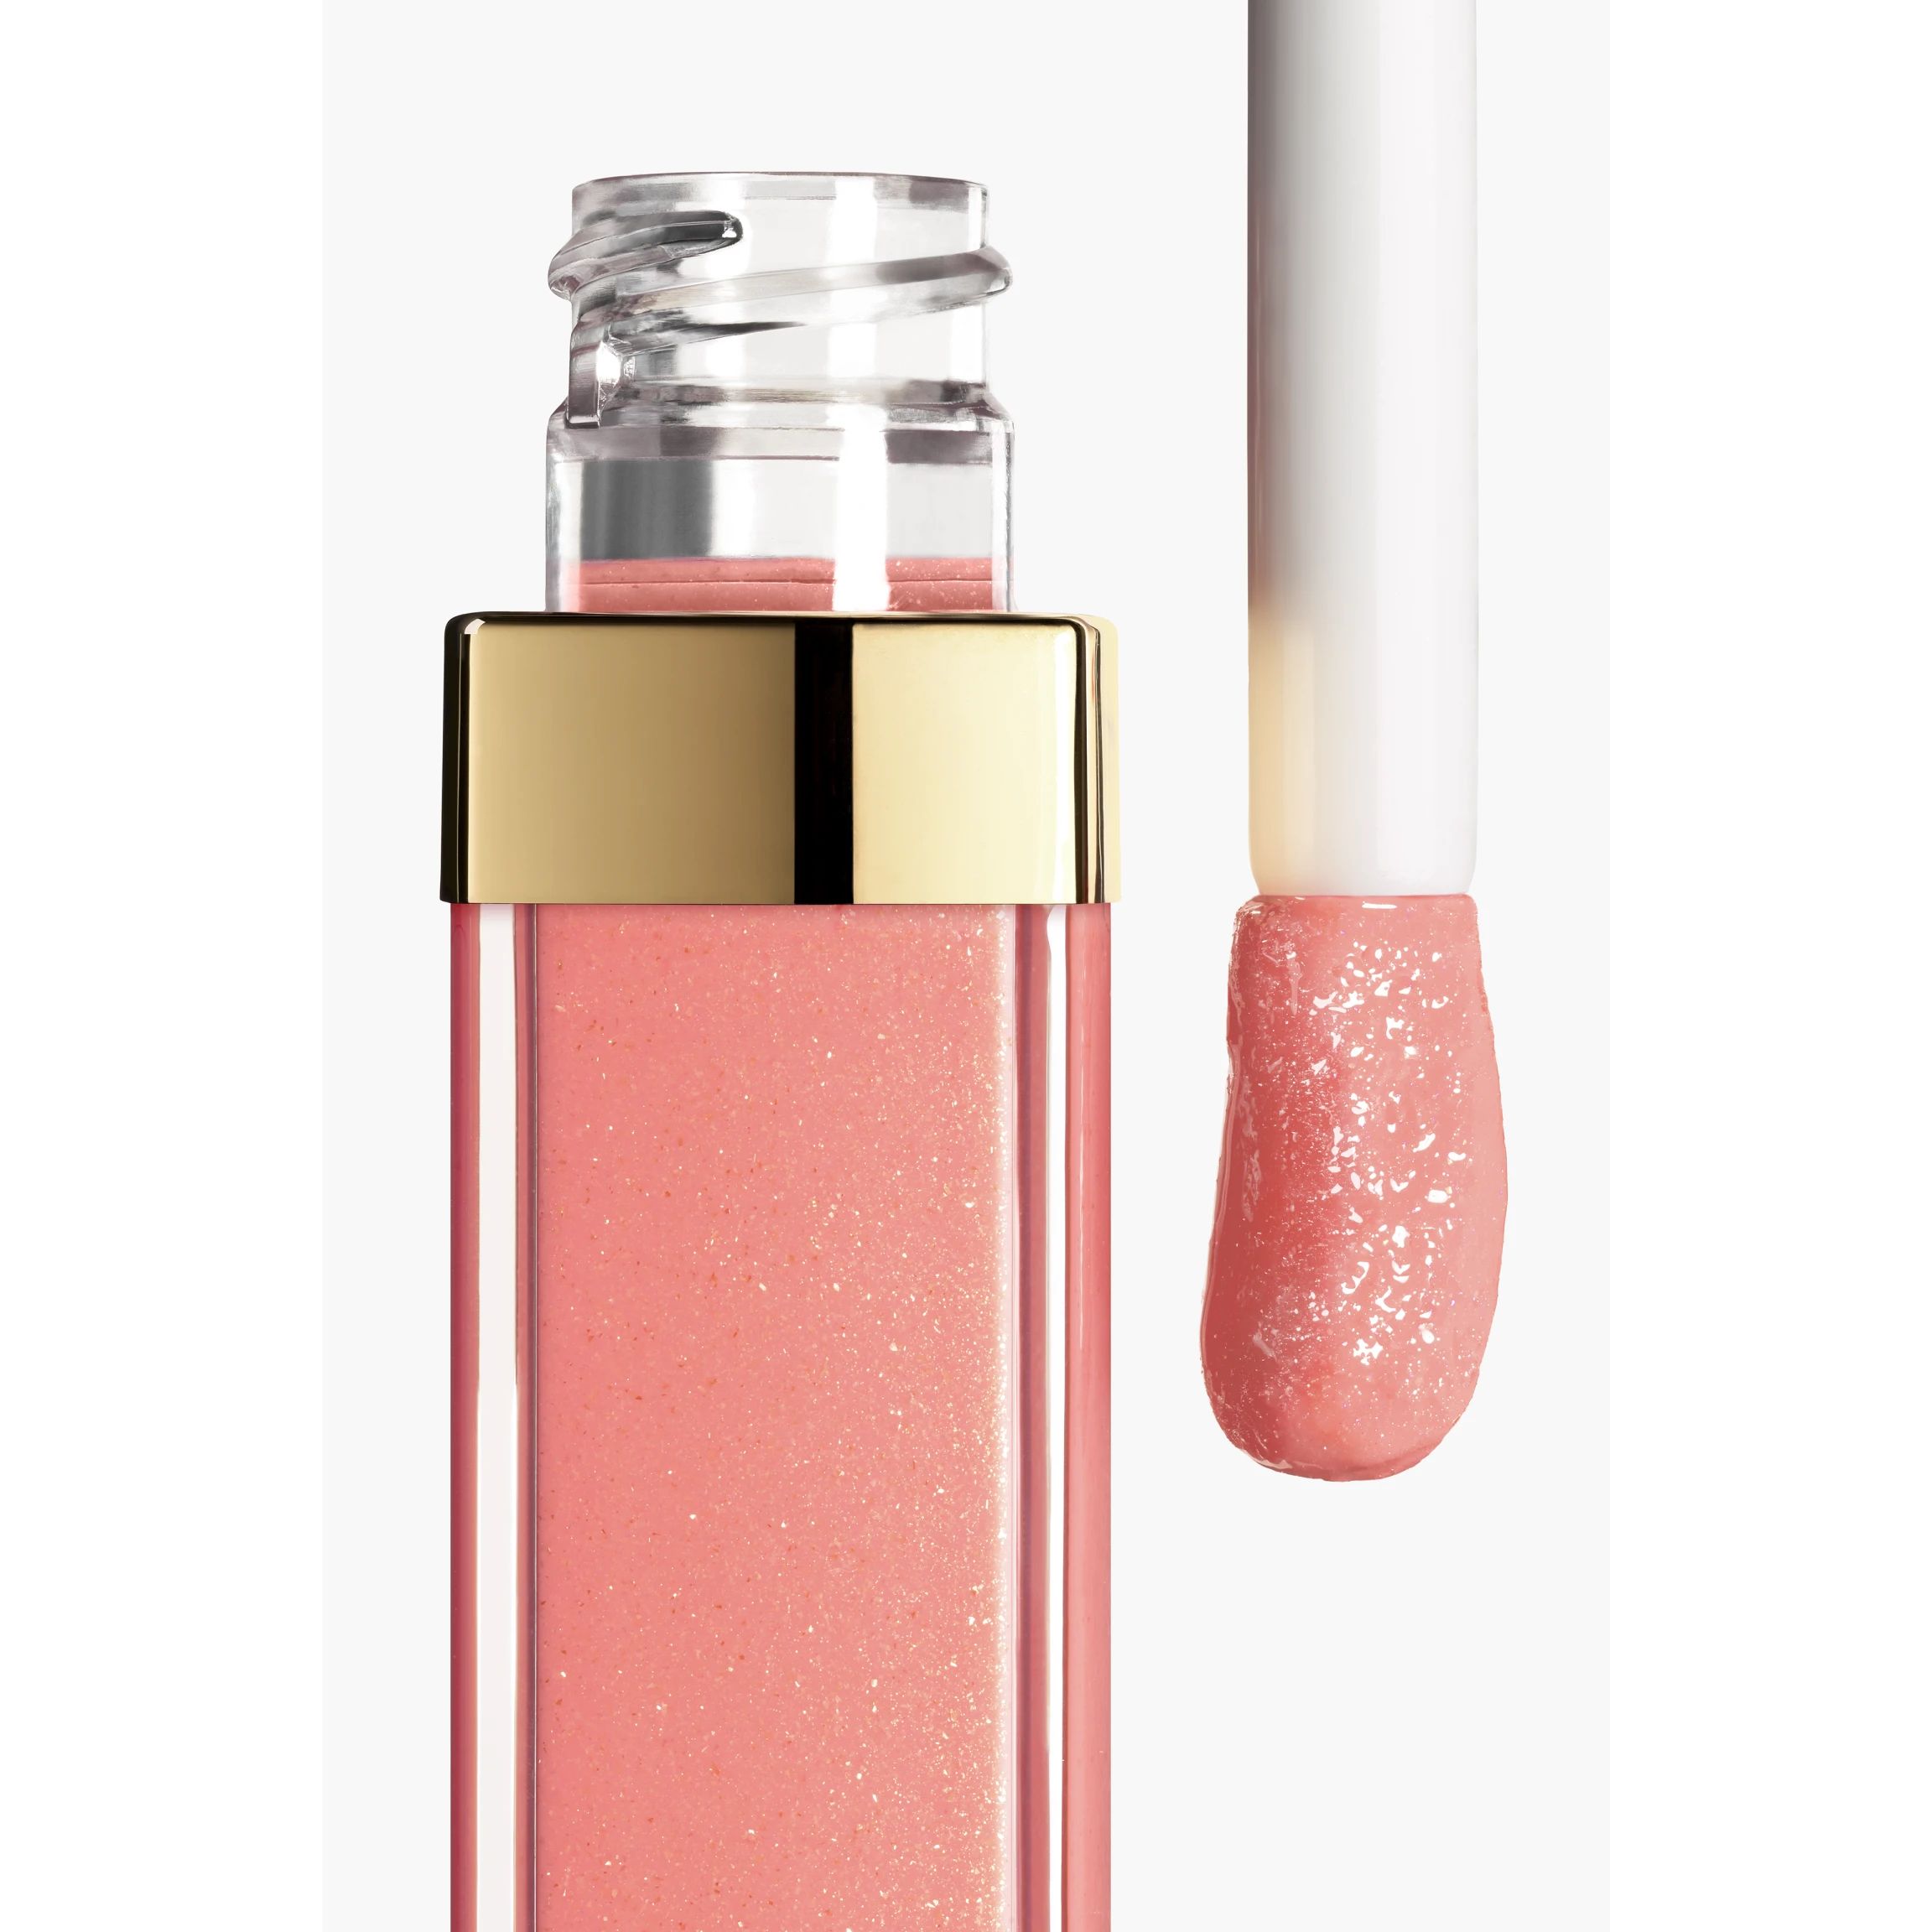 ROUGE COCO GLOSS Moisturizing glossimer 166 - Physical | CHANEL | Chanel, Inc. (US)